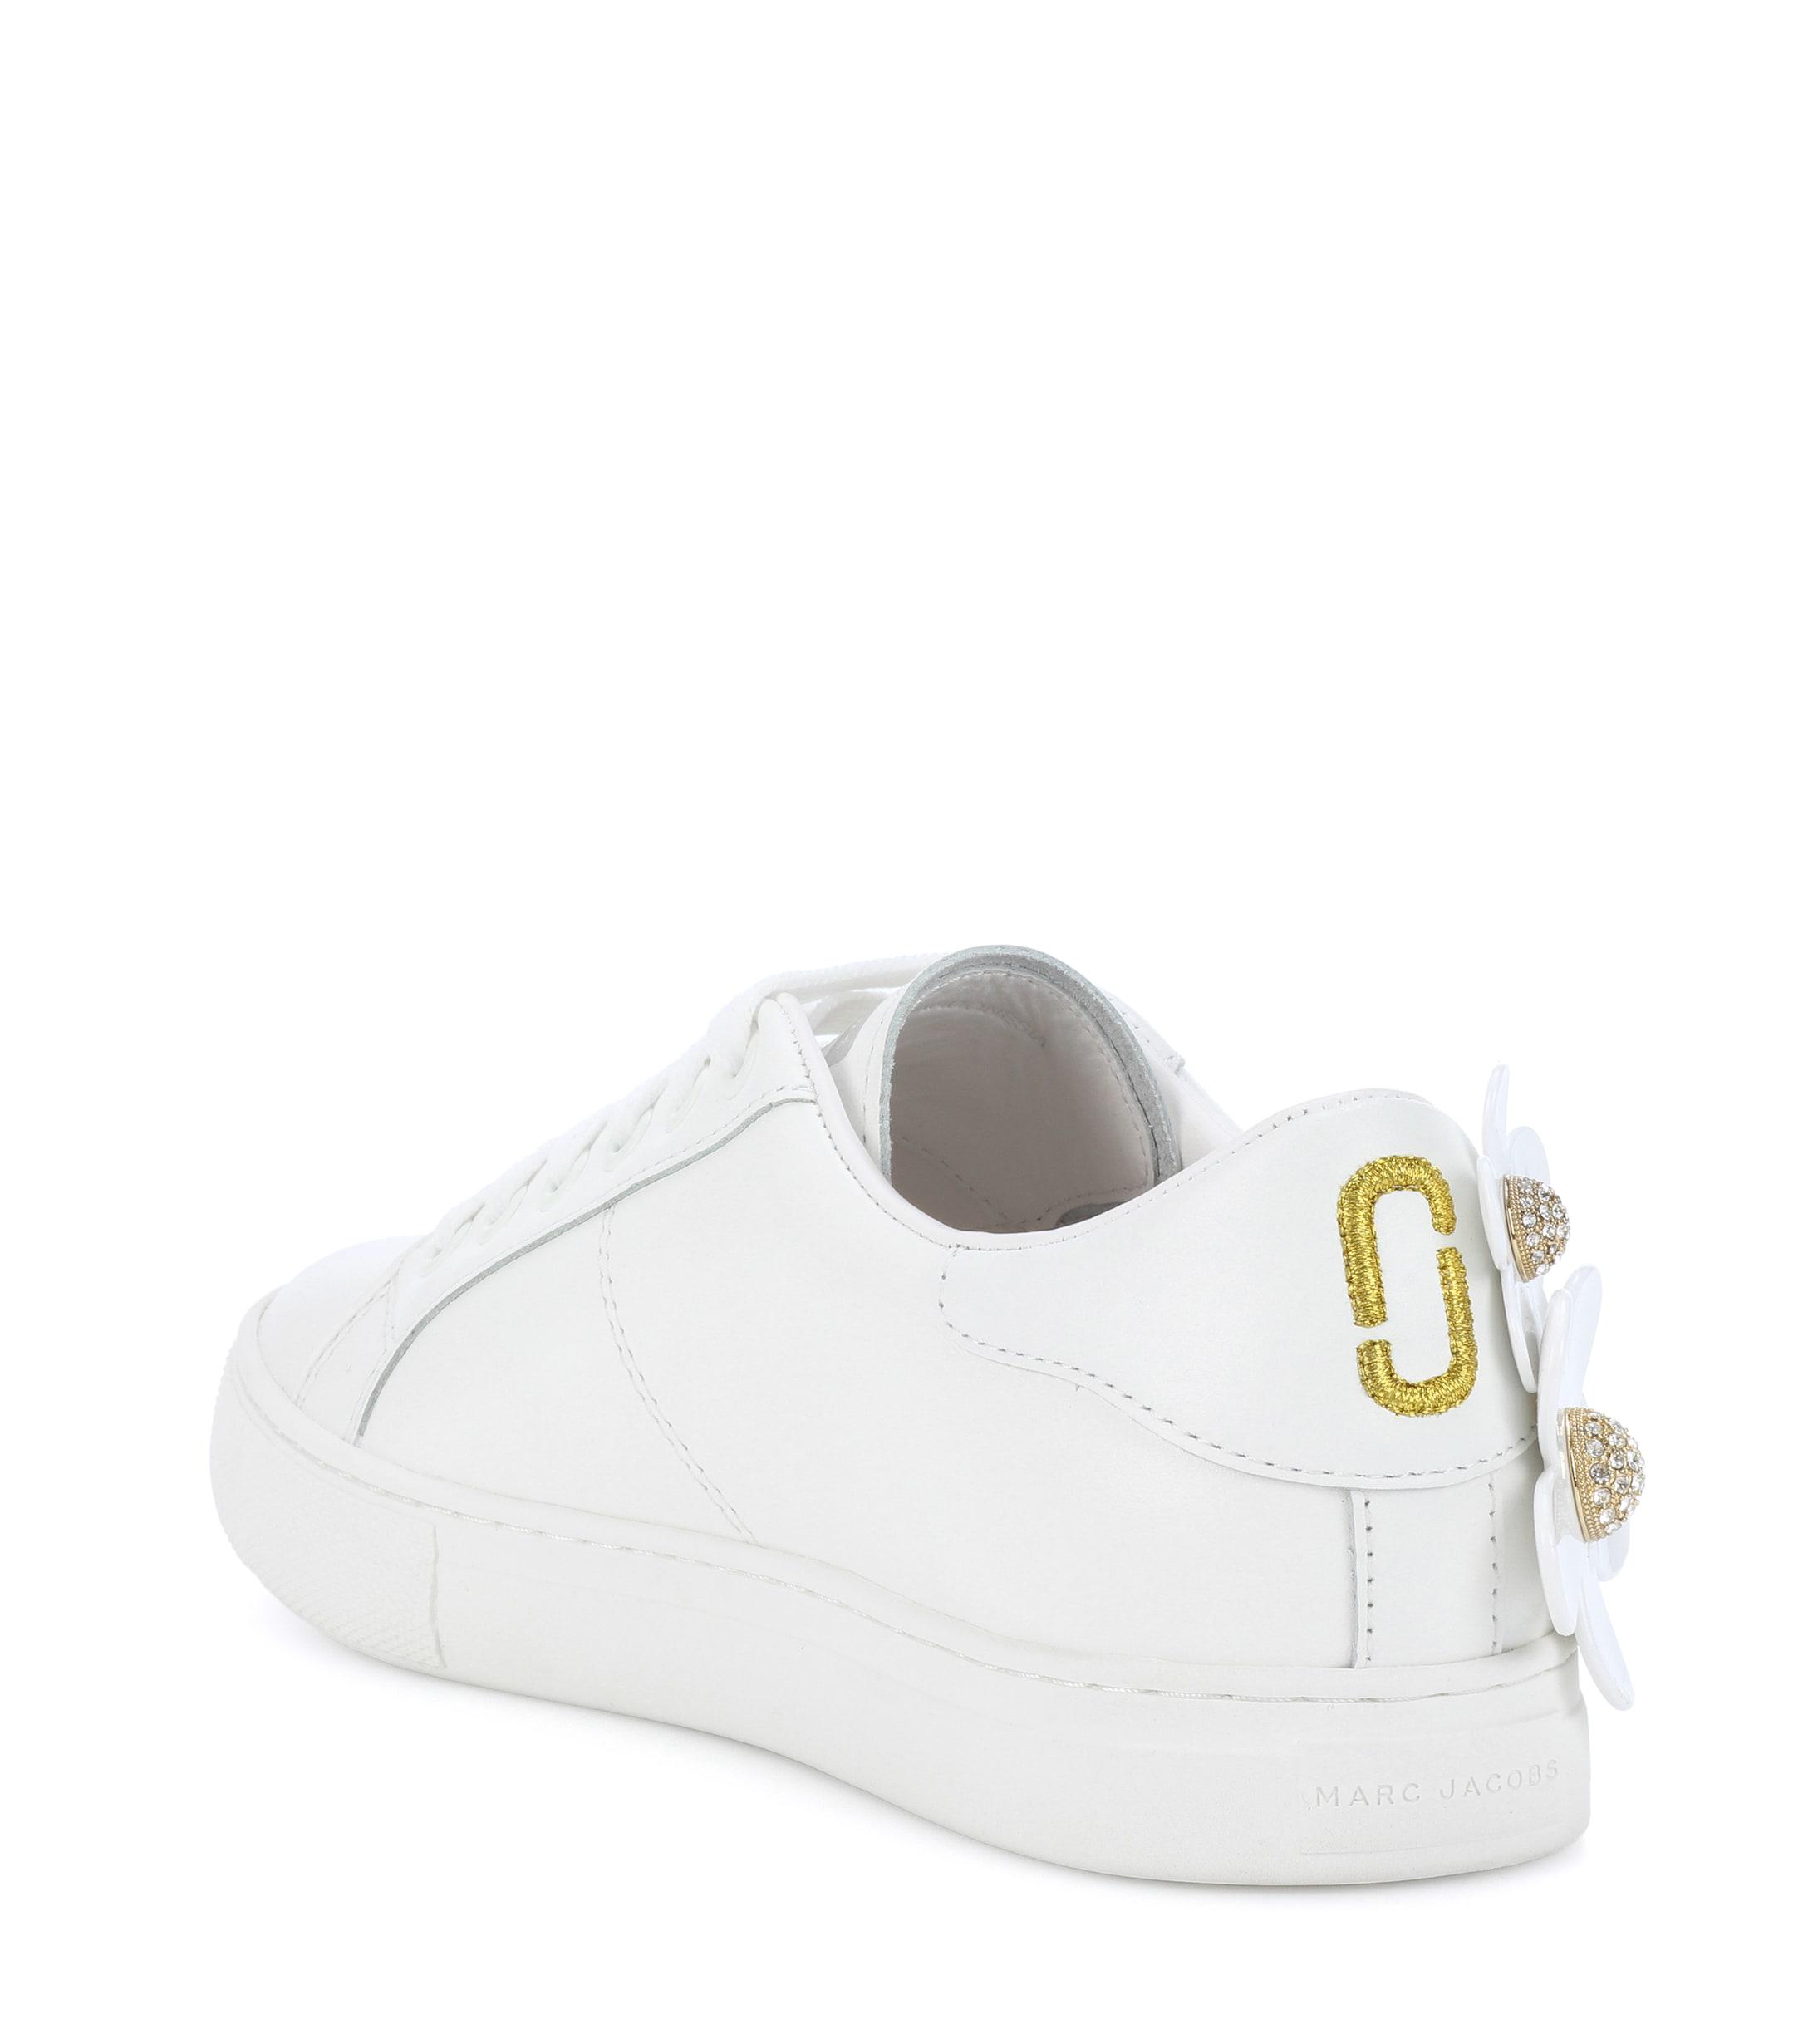 Marc Jacobs Women's Slip On White Leather Embellished Daisy Sneakers Sz 37 7